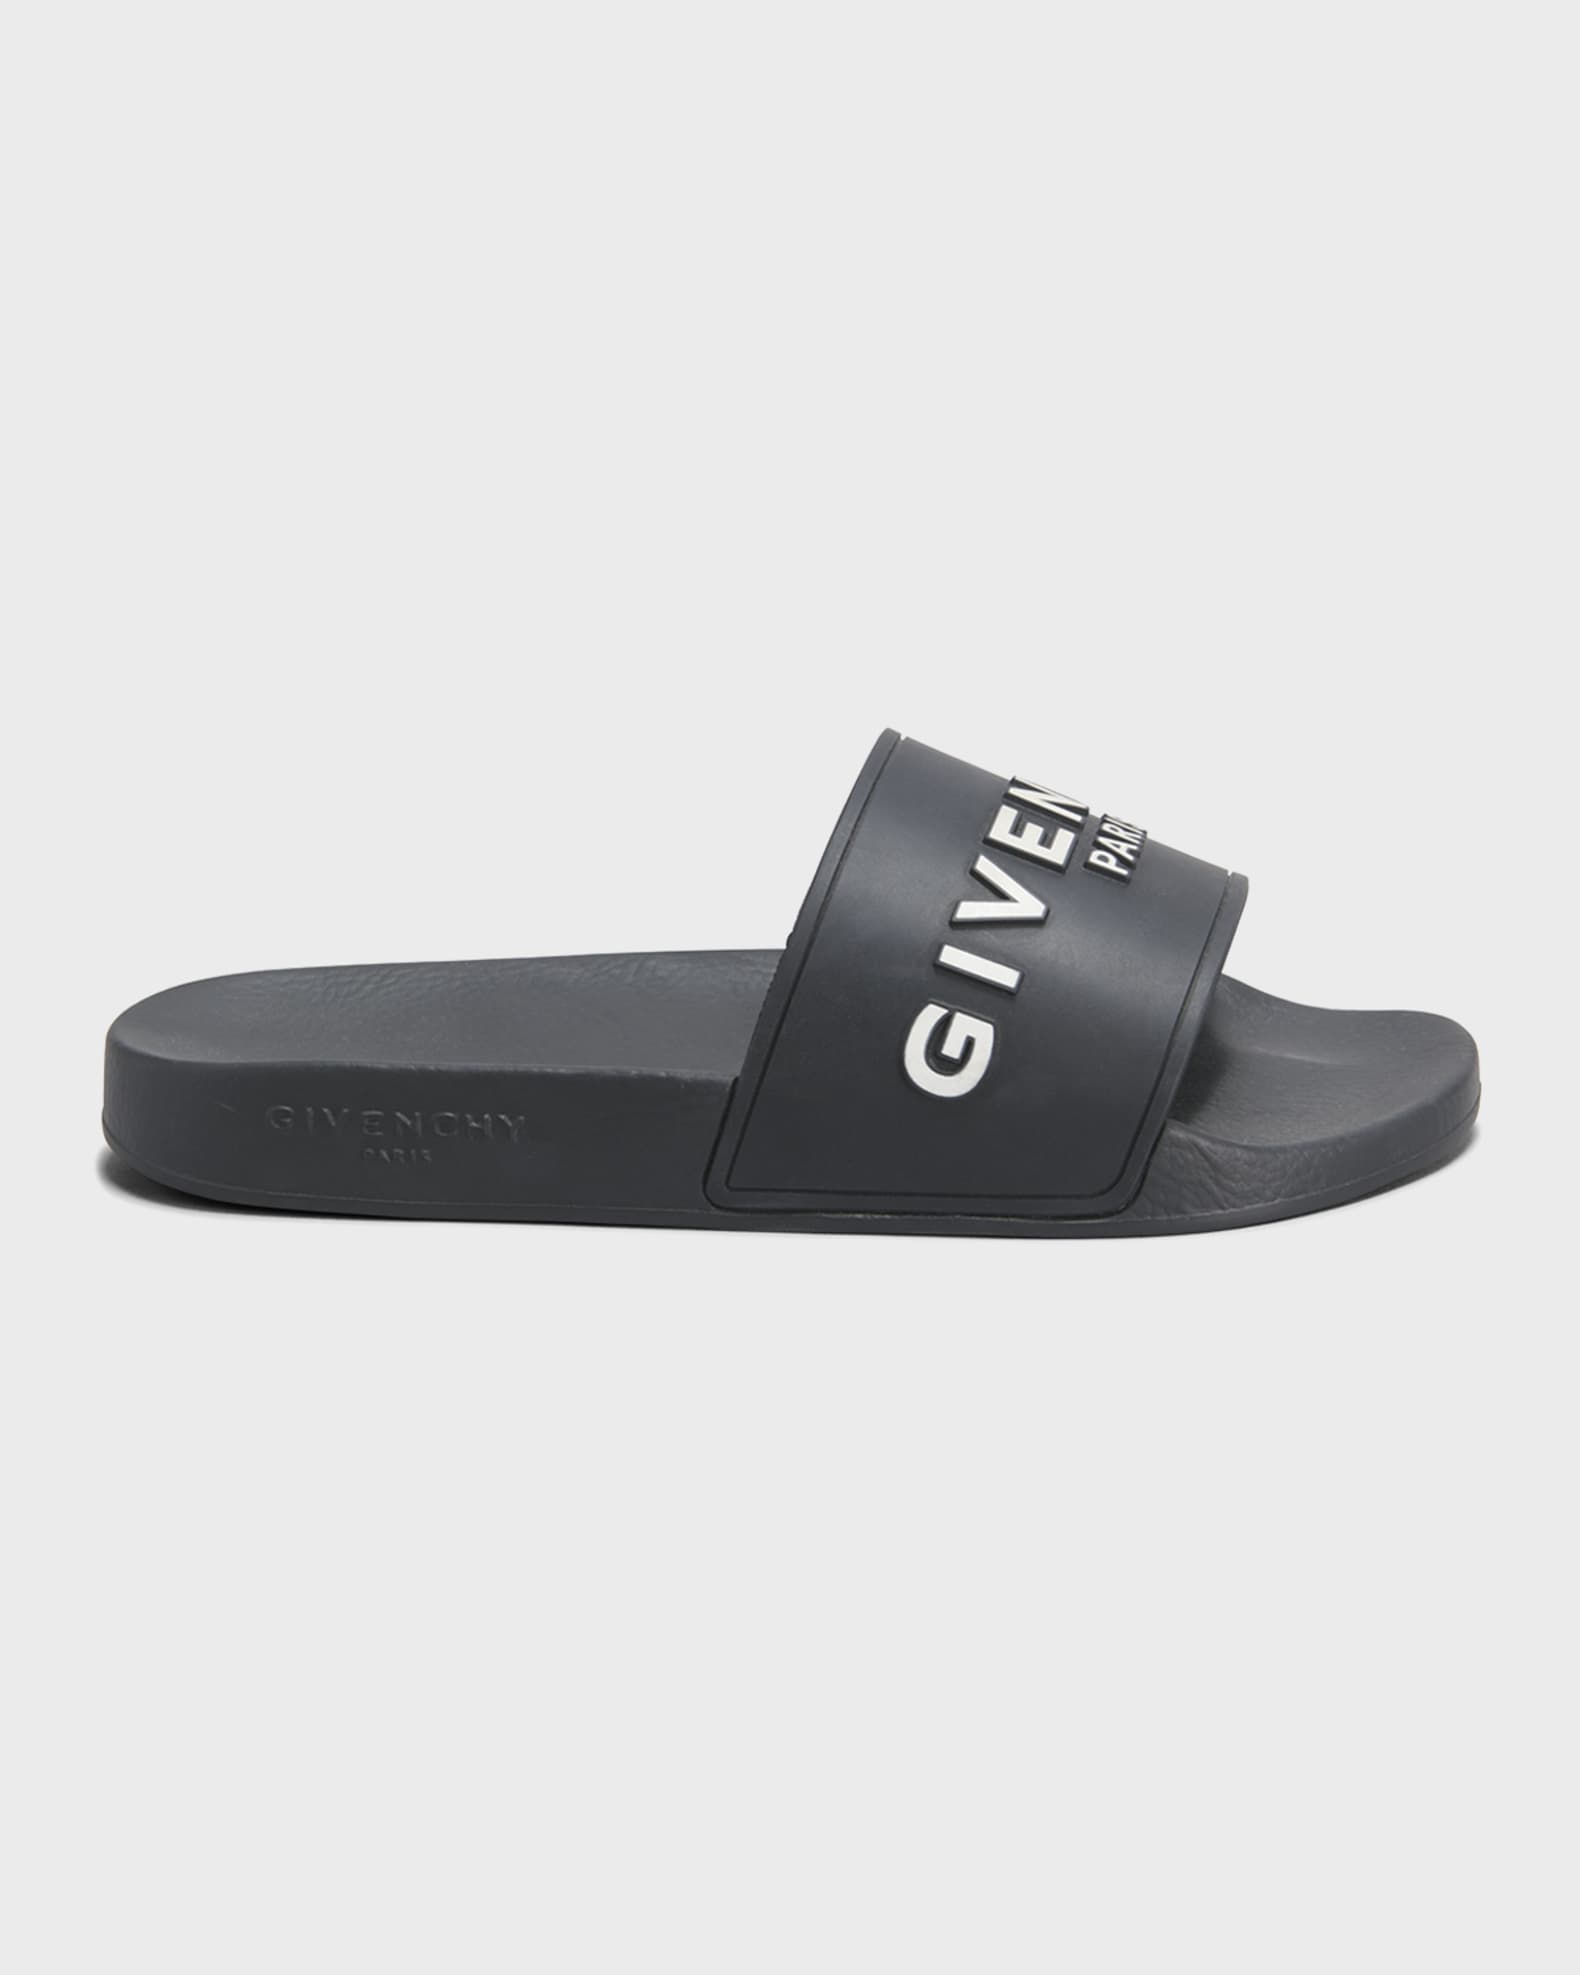 Givenchy Rubber Slide | Neiman Marcus